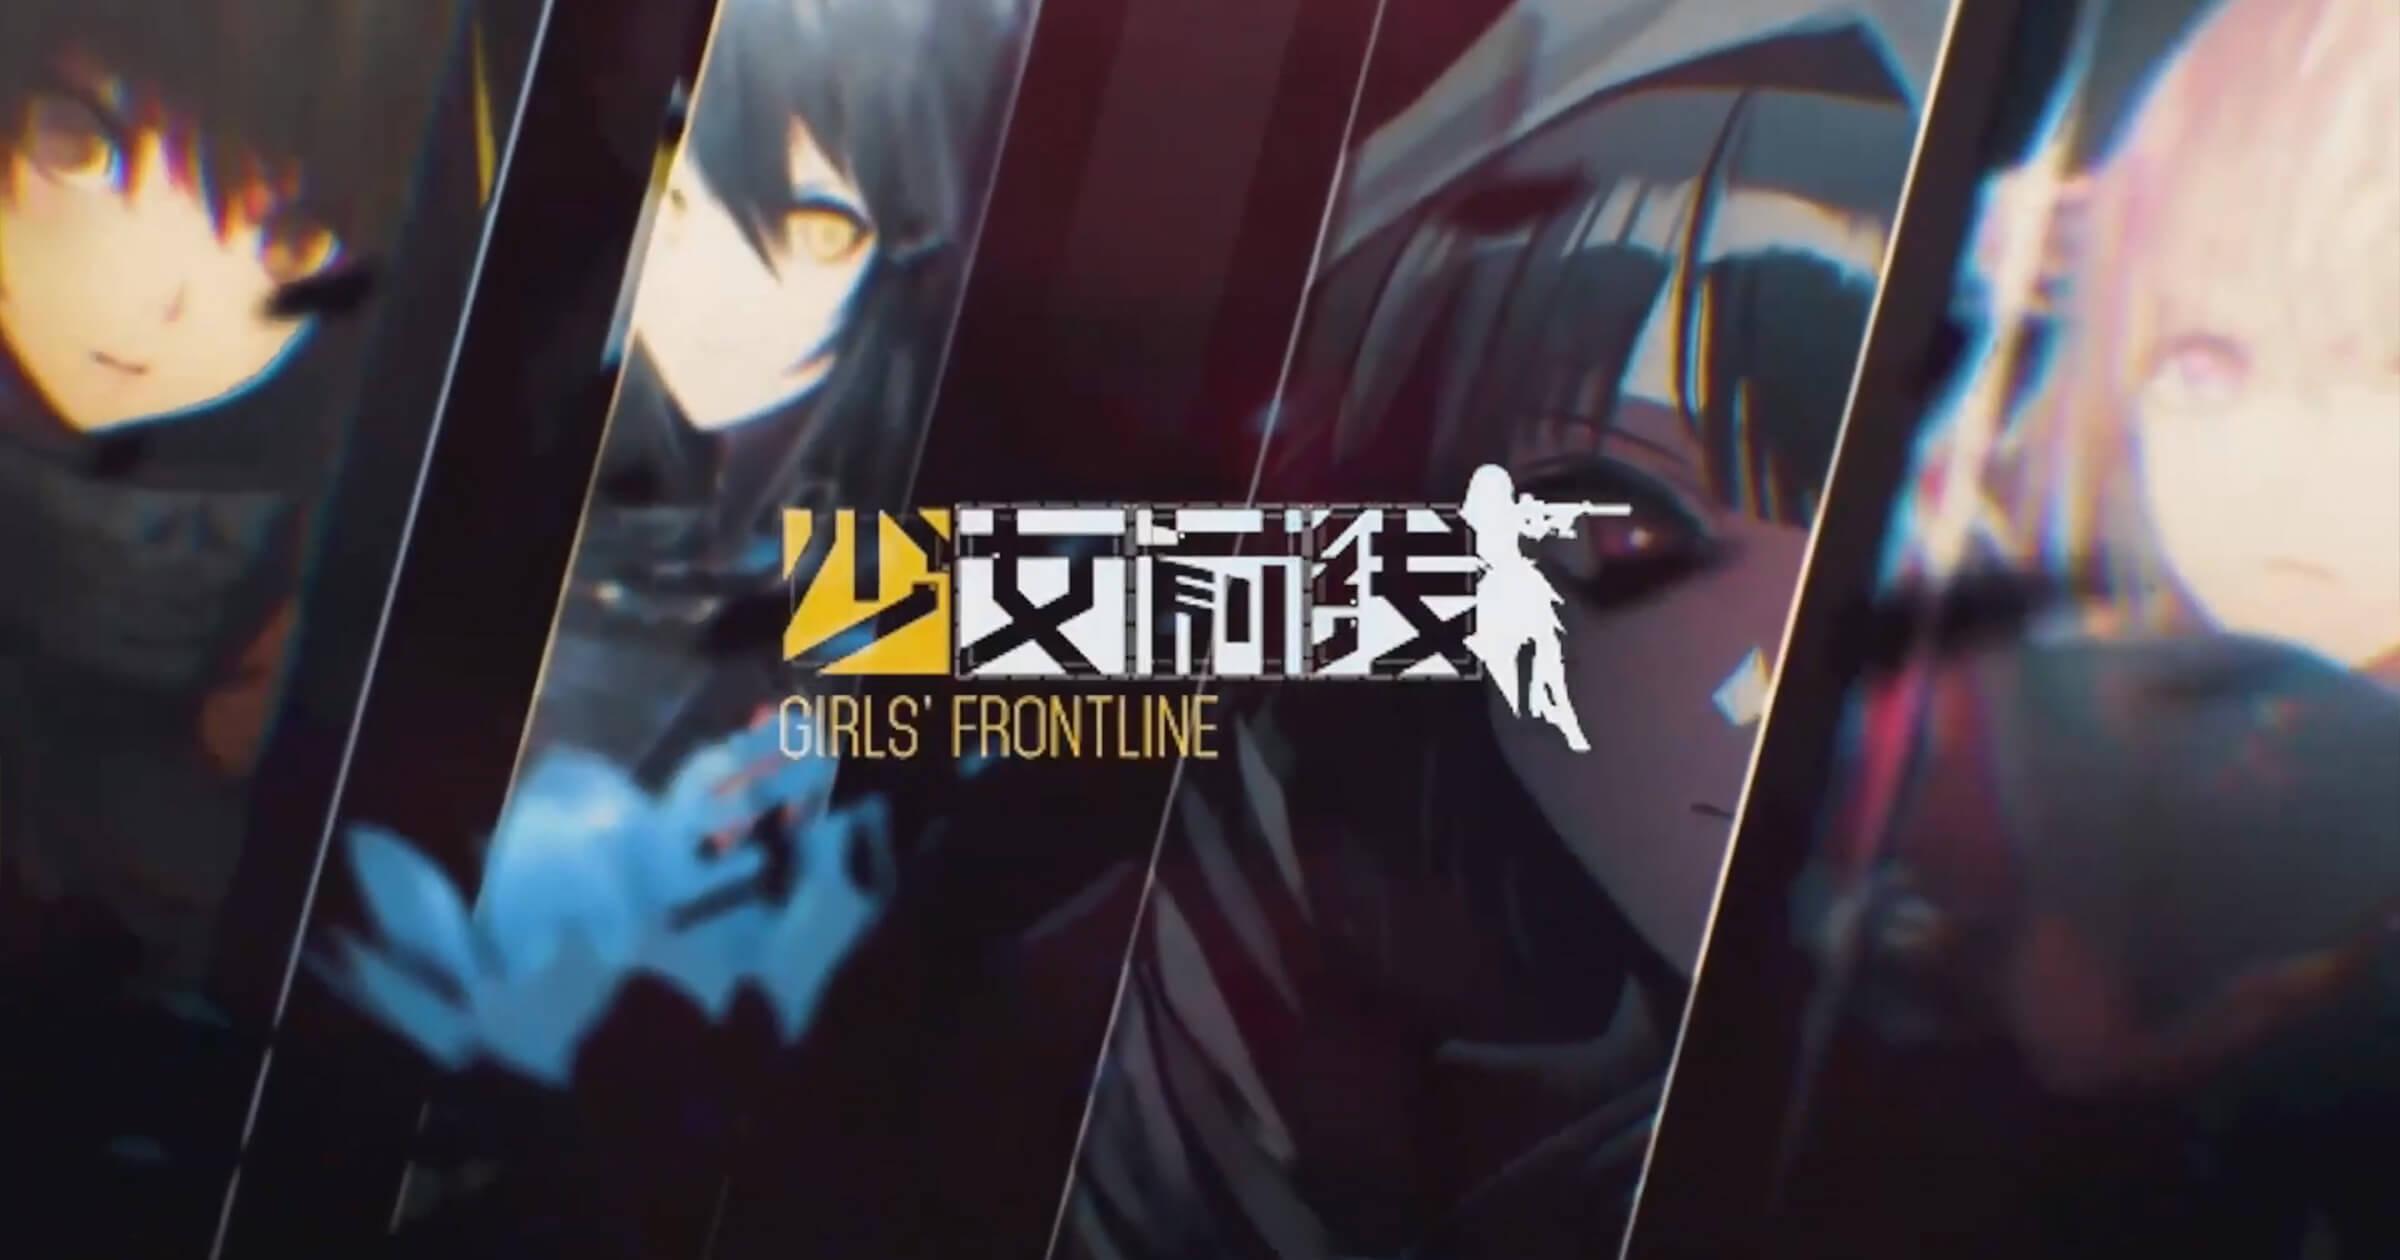 Operation Burning Griffin is the cumulation of many content creators from bilibili. This is a Chinese New Year themed work, consisting of season's greetings, music videos, animations, memes and fun. Sit back and enjoy